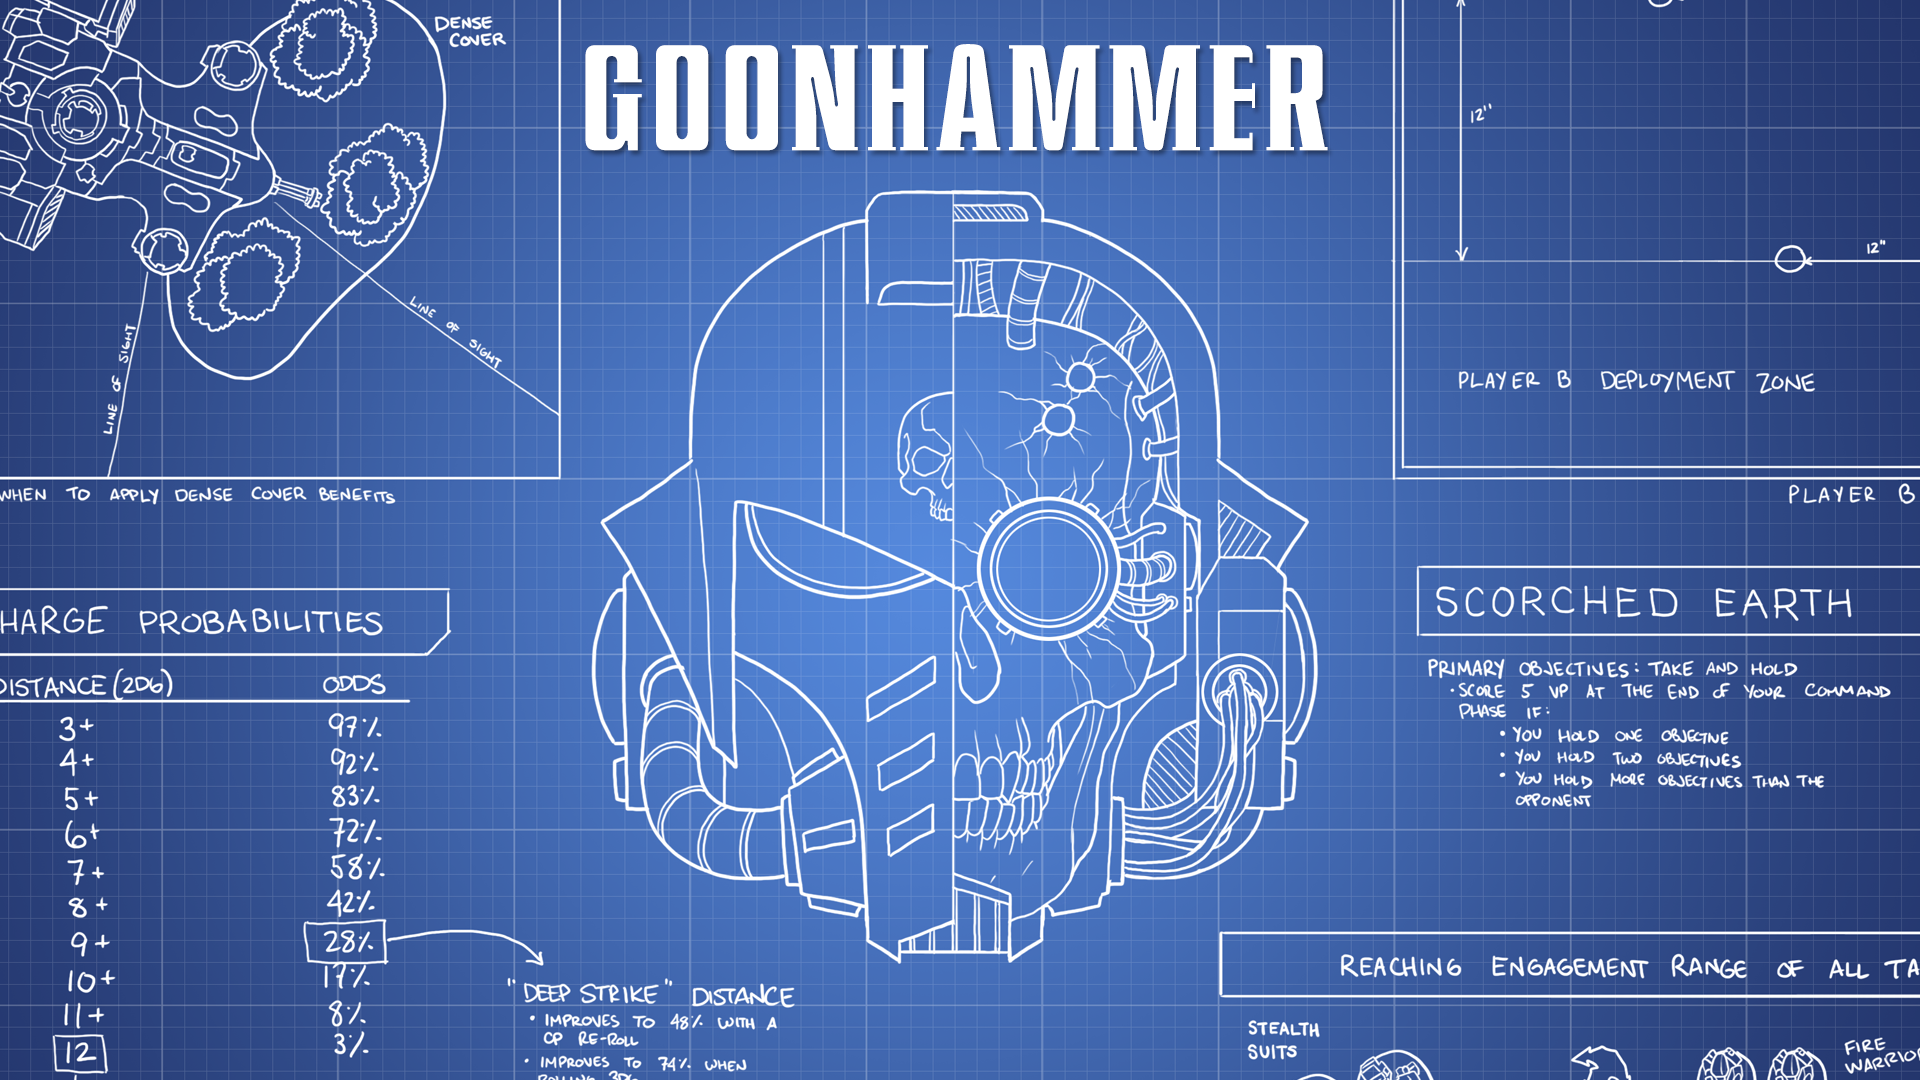 New Thousand Sons 10th Edition 40k Rules: Datasheets & Index Cards